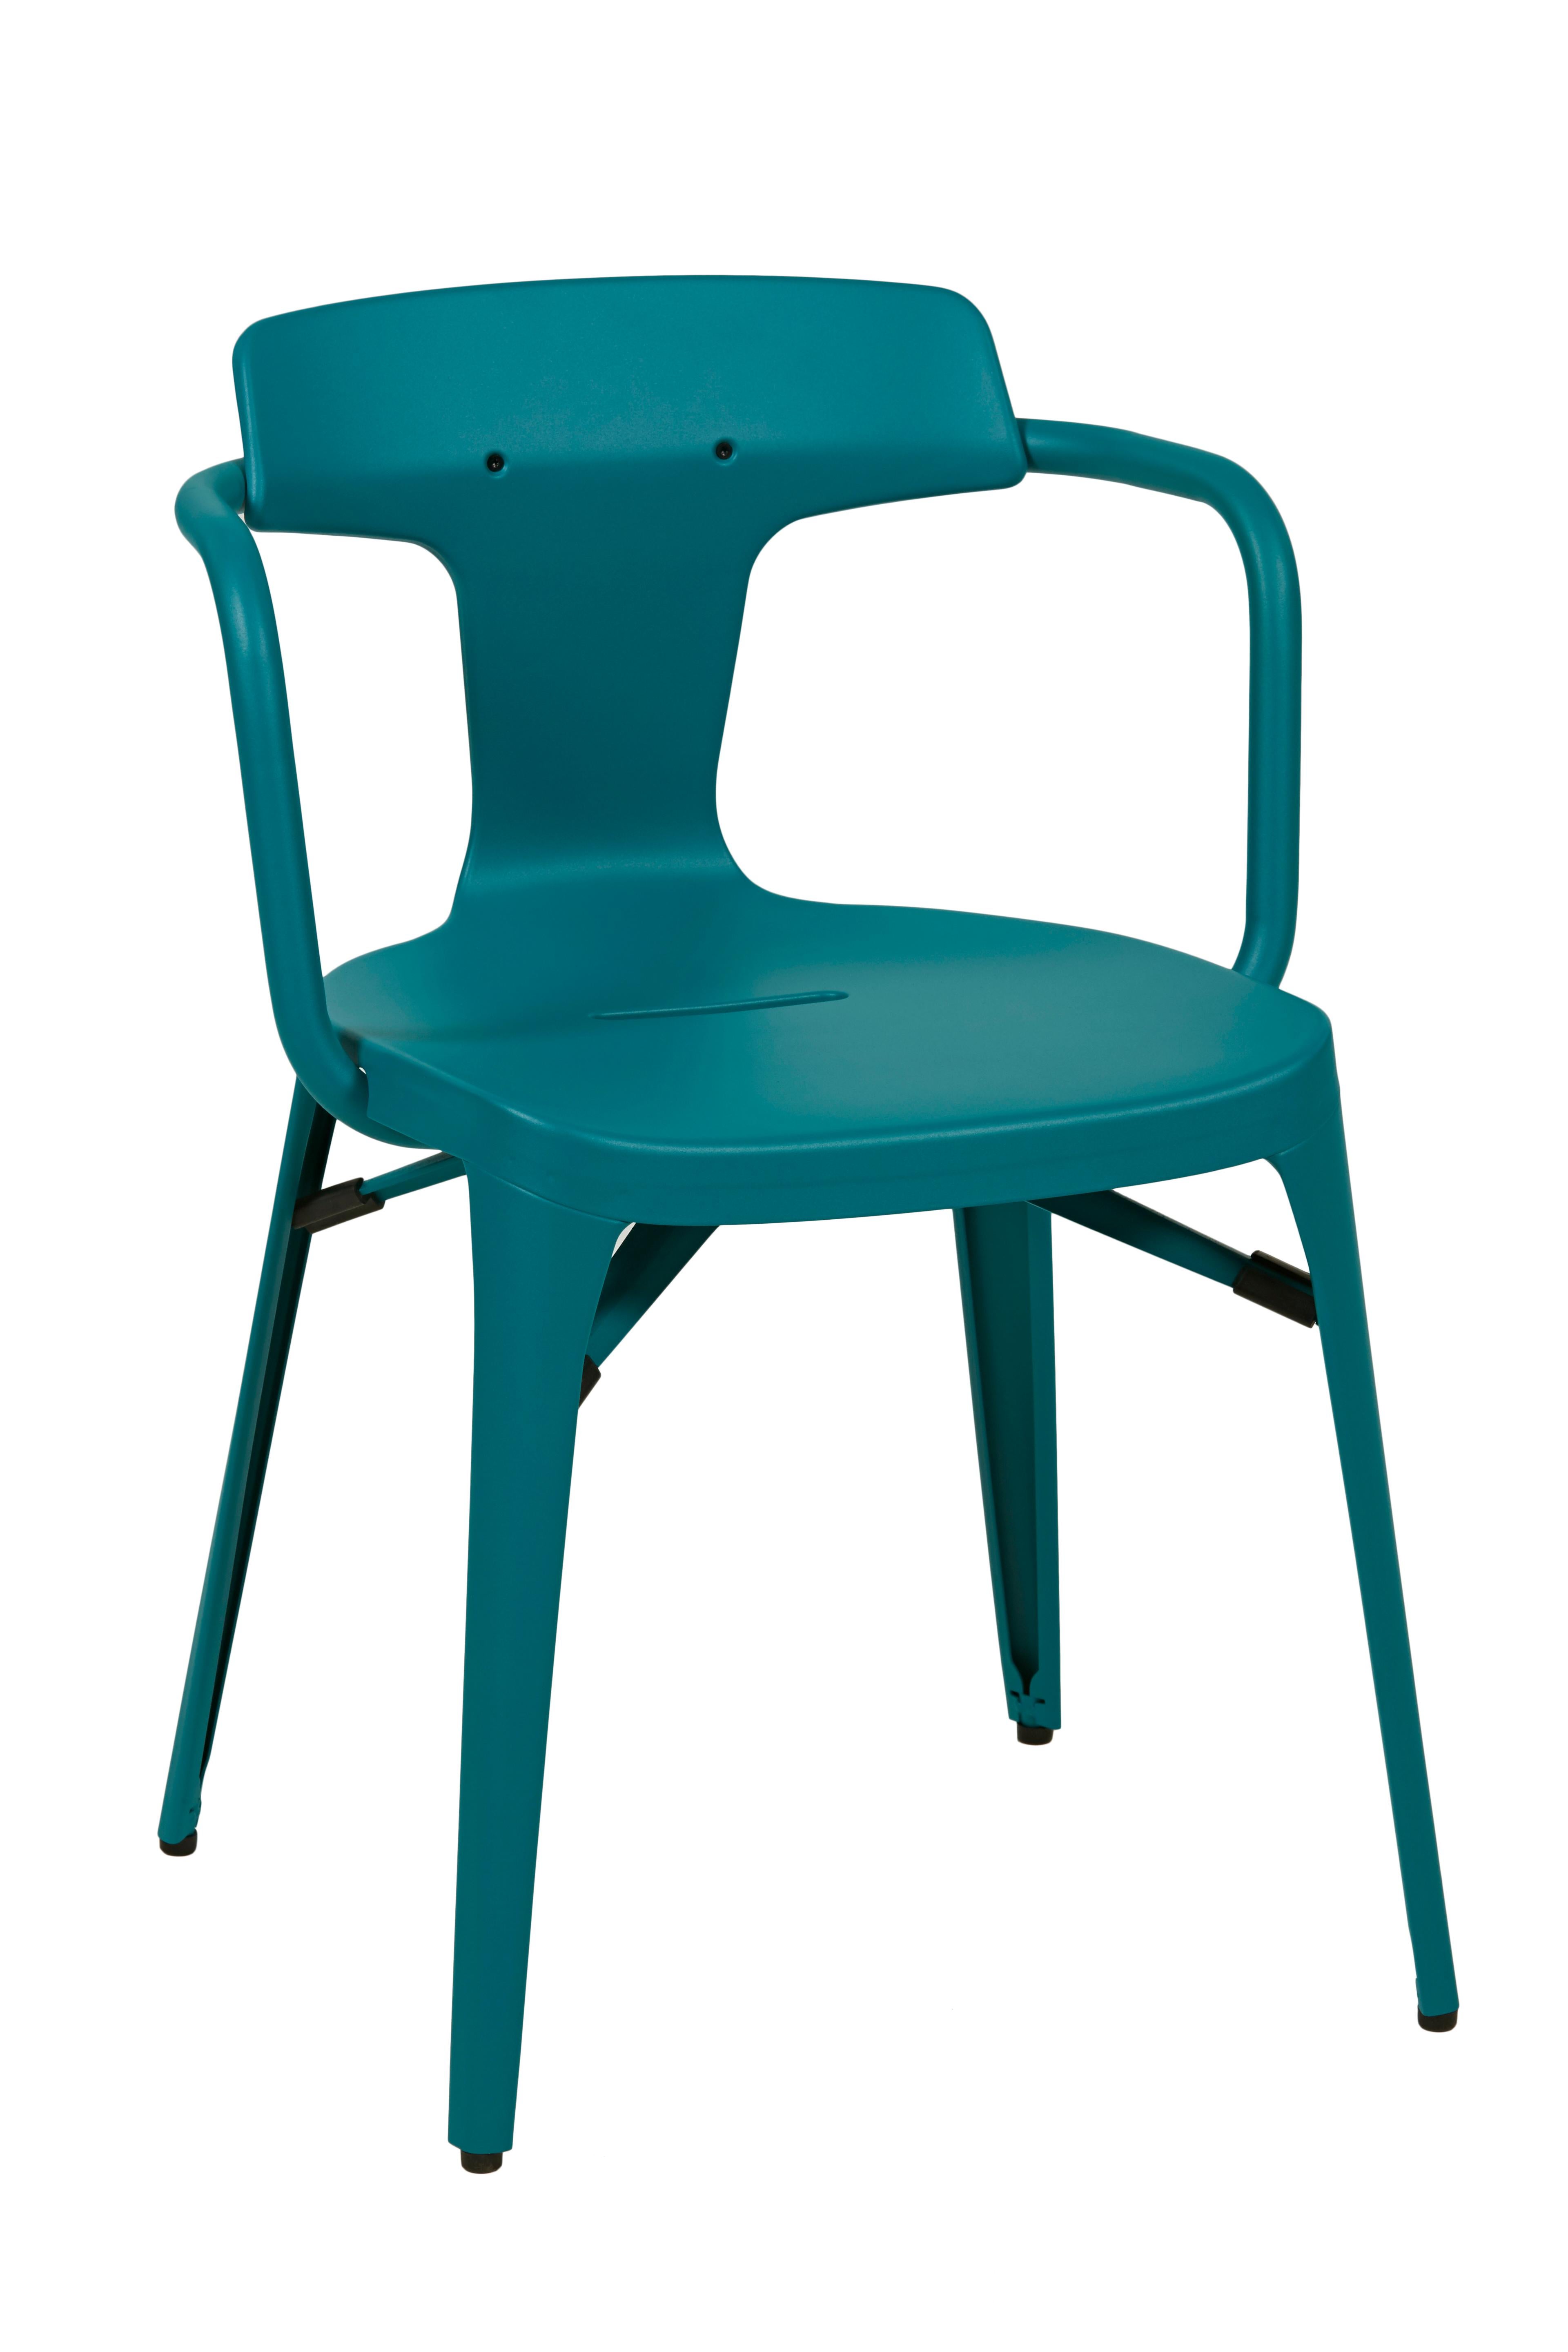 Im Angebot: T14 Chair in Pop Colors by Patrick Norguet and Tolix, Green (Vert Canard) 3